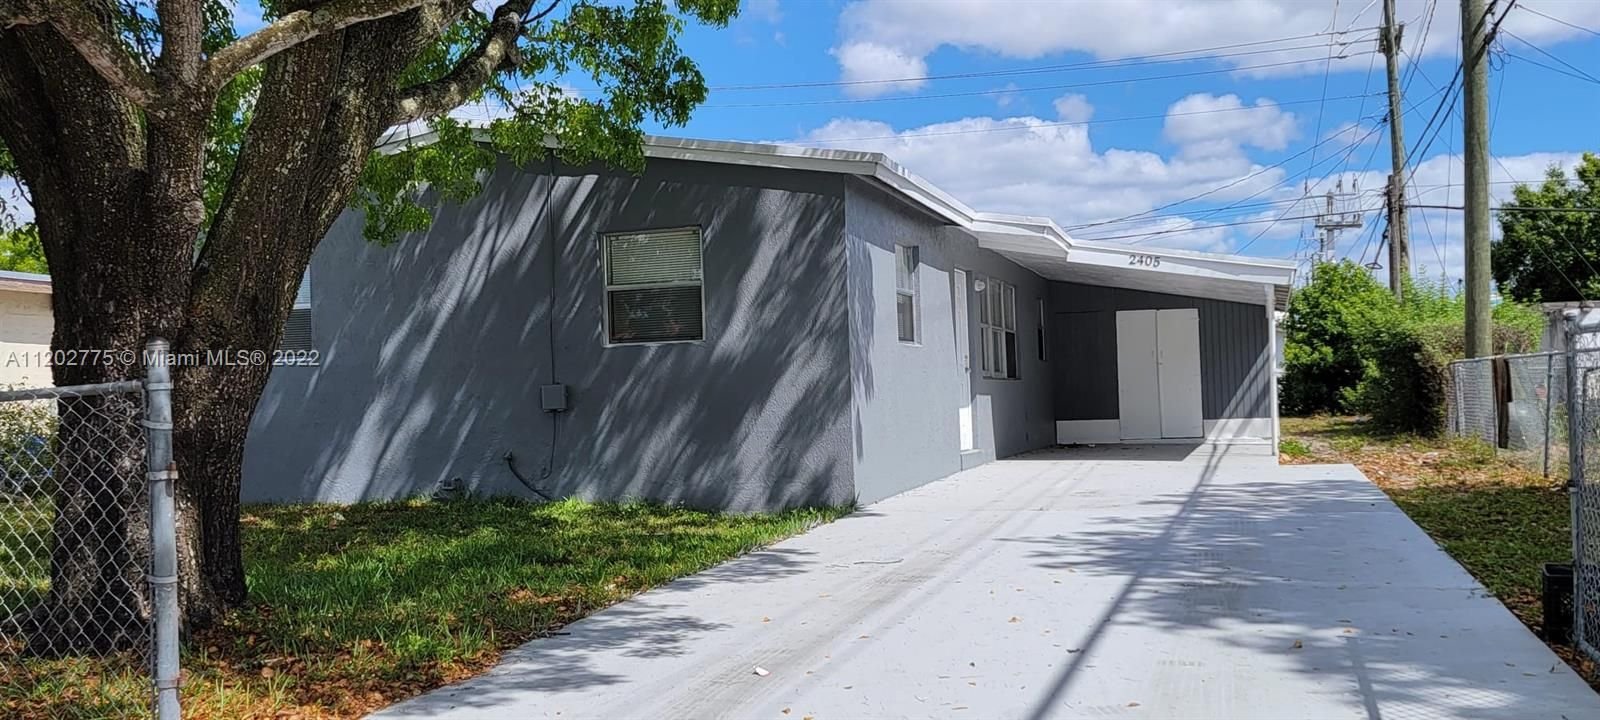 Real estate property located at 2405 15th Ct, Broward County, Fort Lauderdale, FL